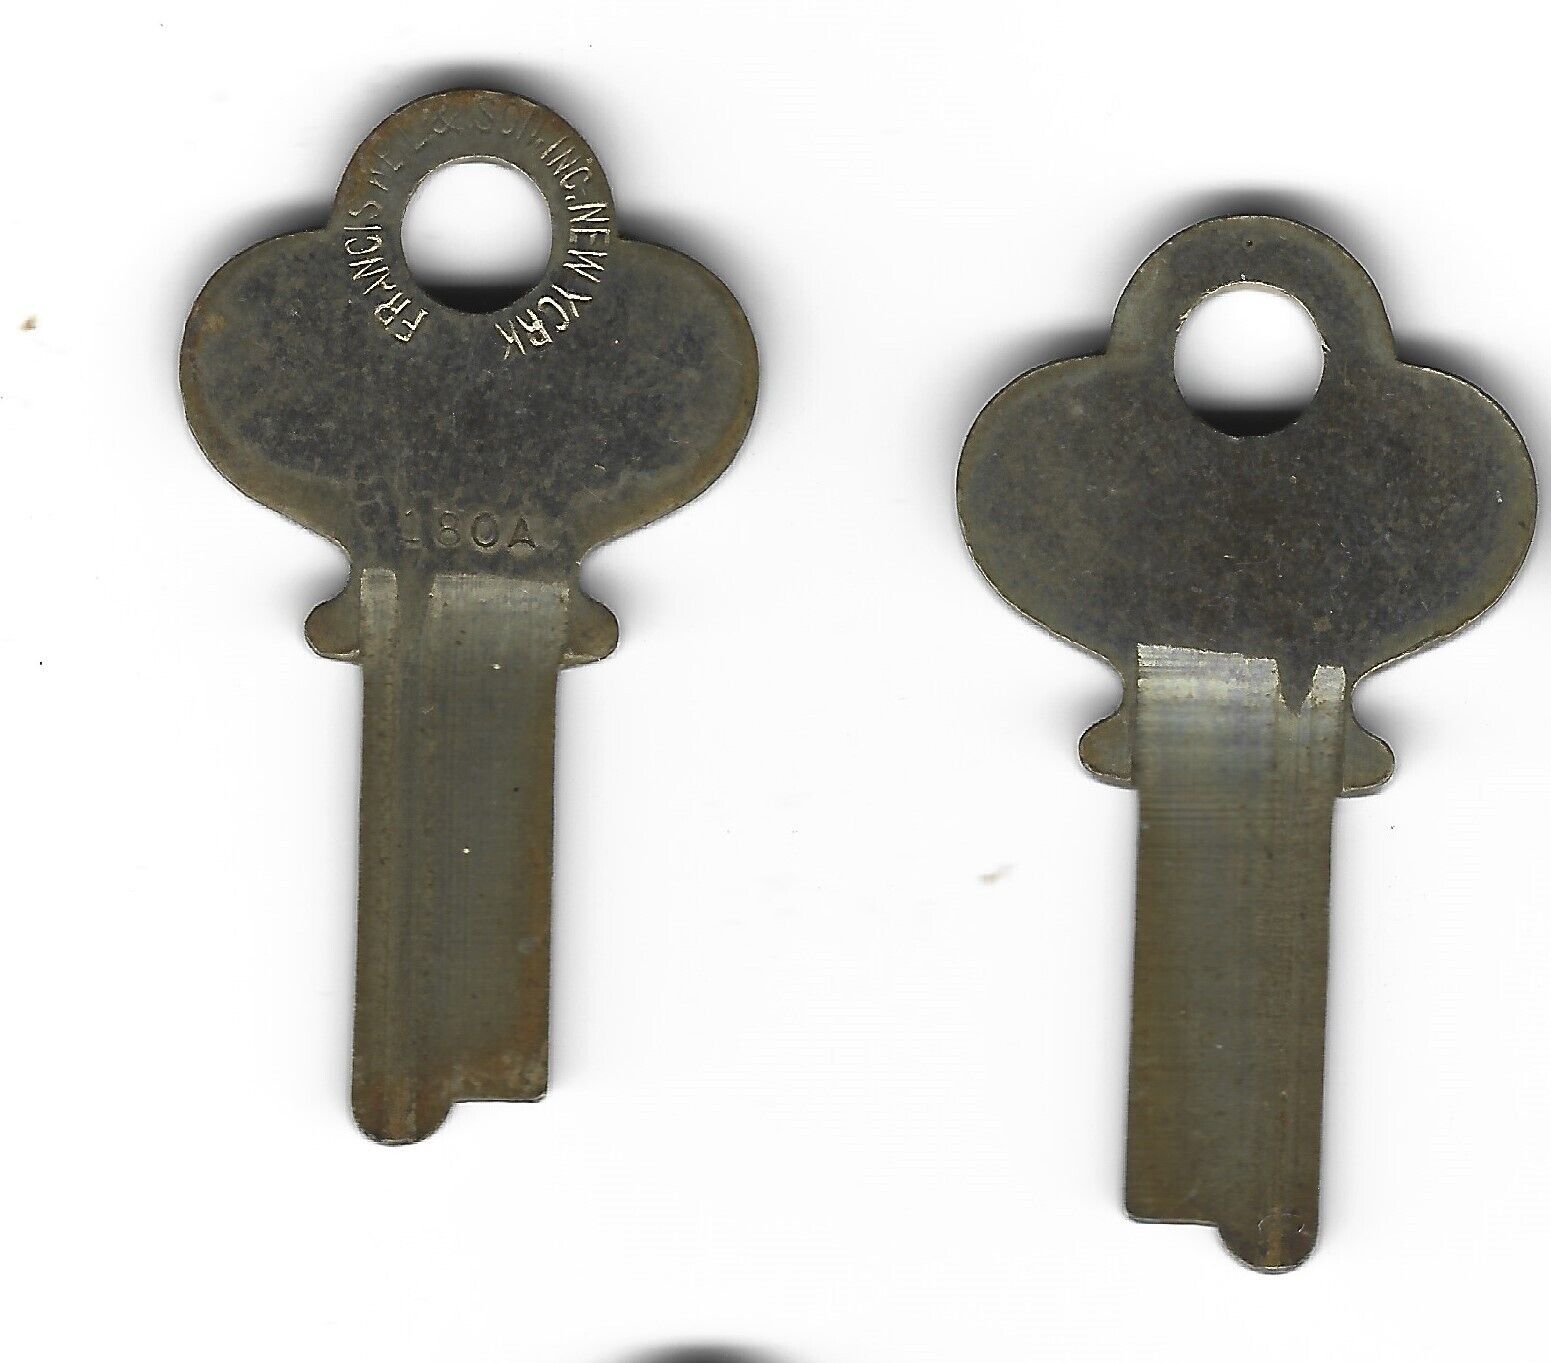 Keil 180A New Old Stock Uncut Key Blank Same as Ilco 1056 Fits Vintage Trunks